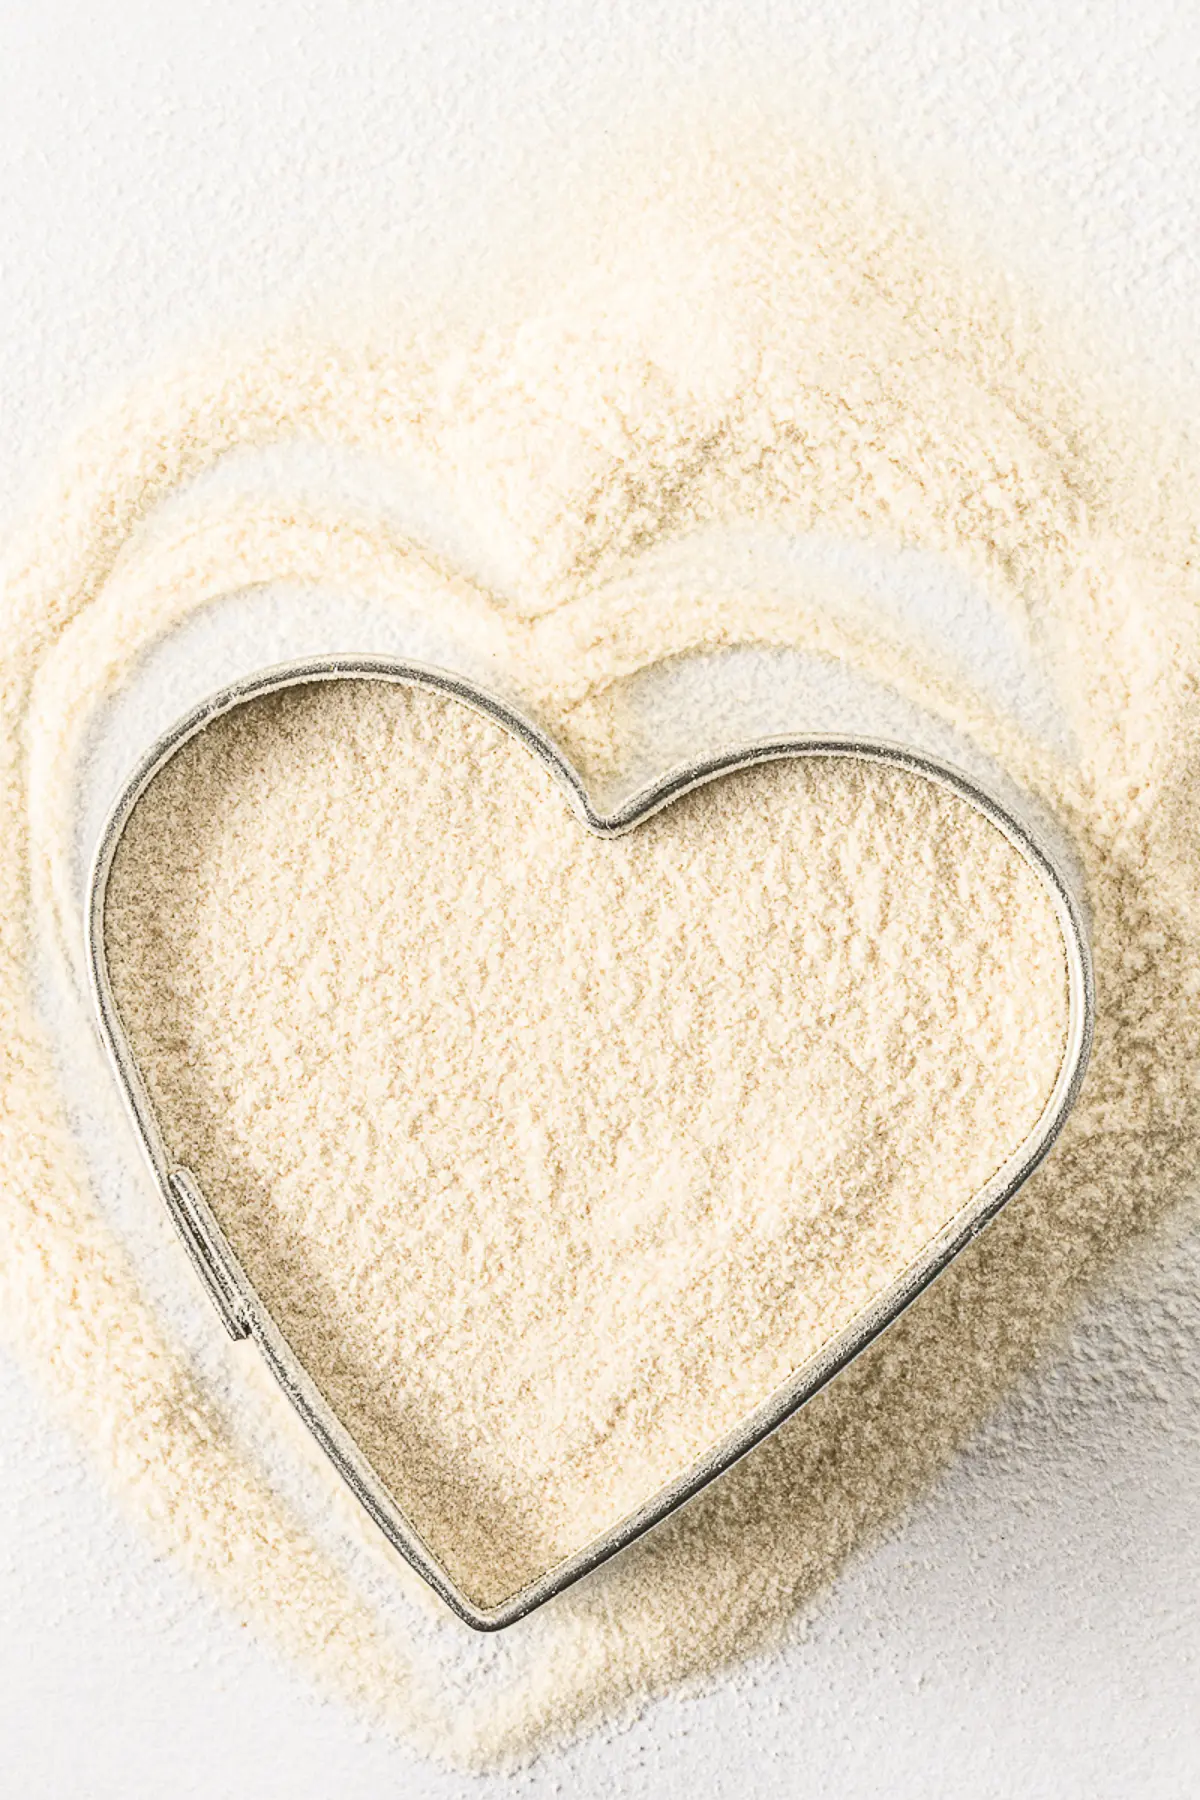 Xanthan gum poured in an around a heart shaped cookie cutter on a bright white background. 